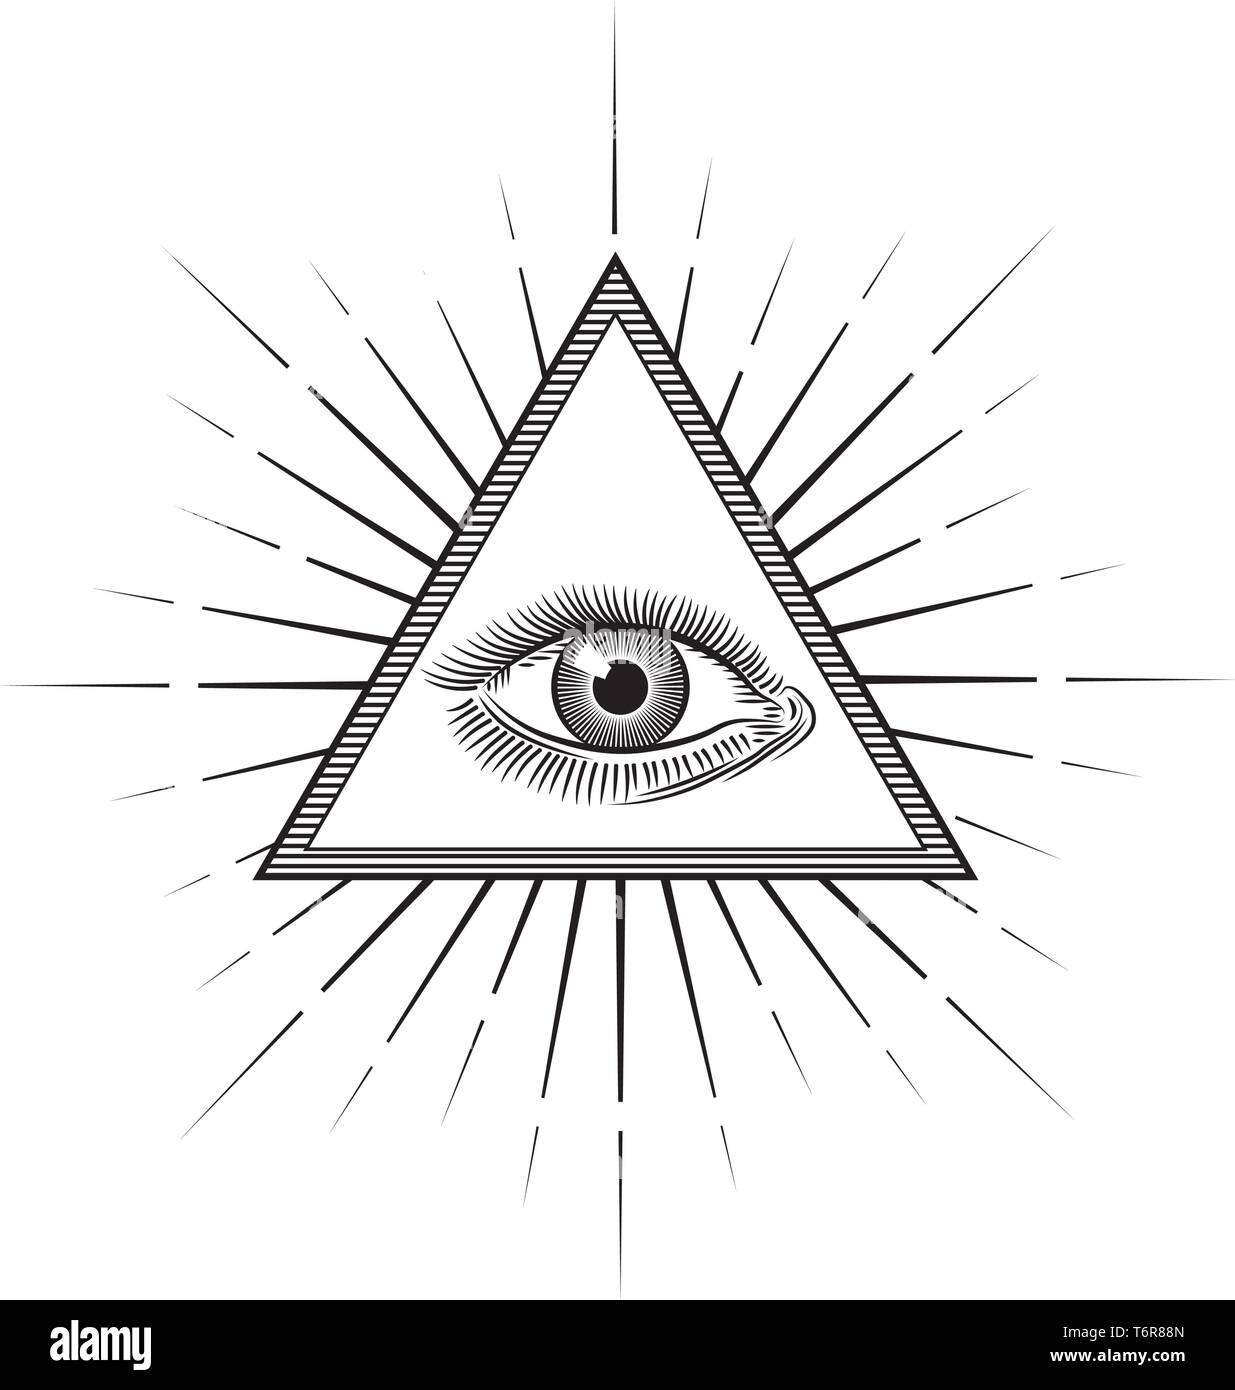 Vintage engraving style Eye of Providence or All seeing eye inside triangle pyramid. Religion, spirituality and occultism symbol Isolated vector illus Stock Vector